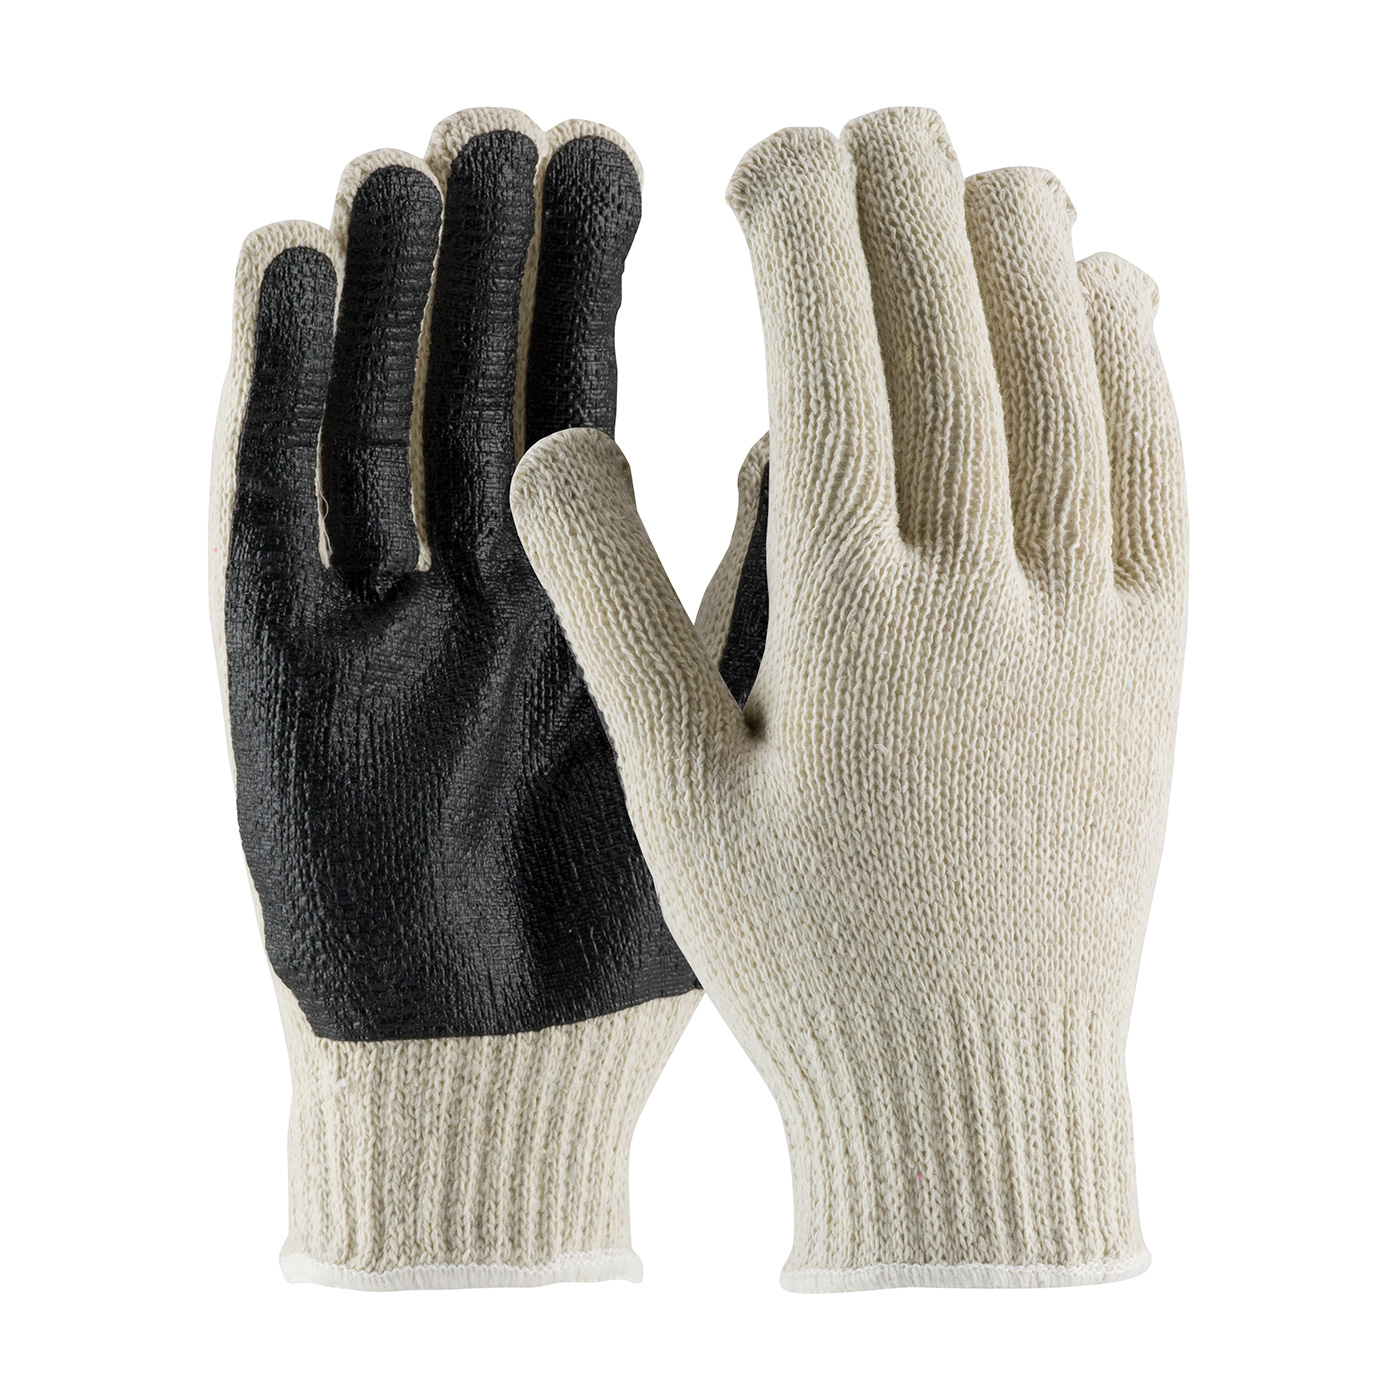 PIP® Seamless Knit Cotton / Polyester Glove with PVC Palm Coating - Regular Weight   #36-110PC-BK